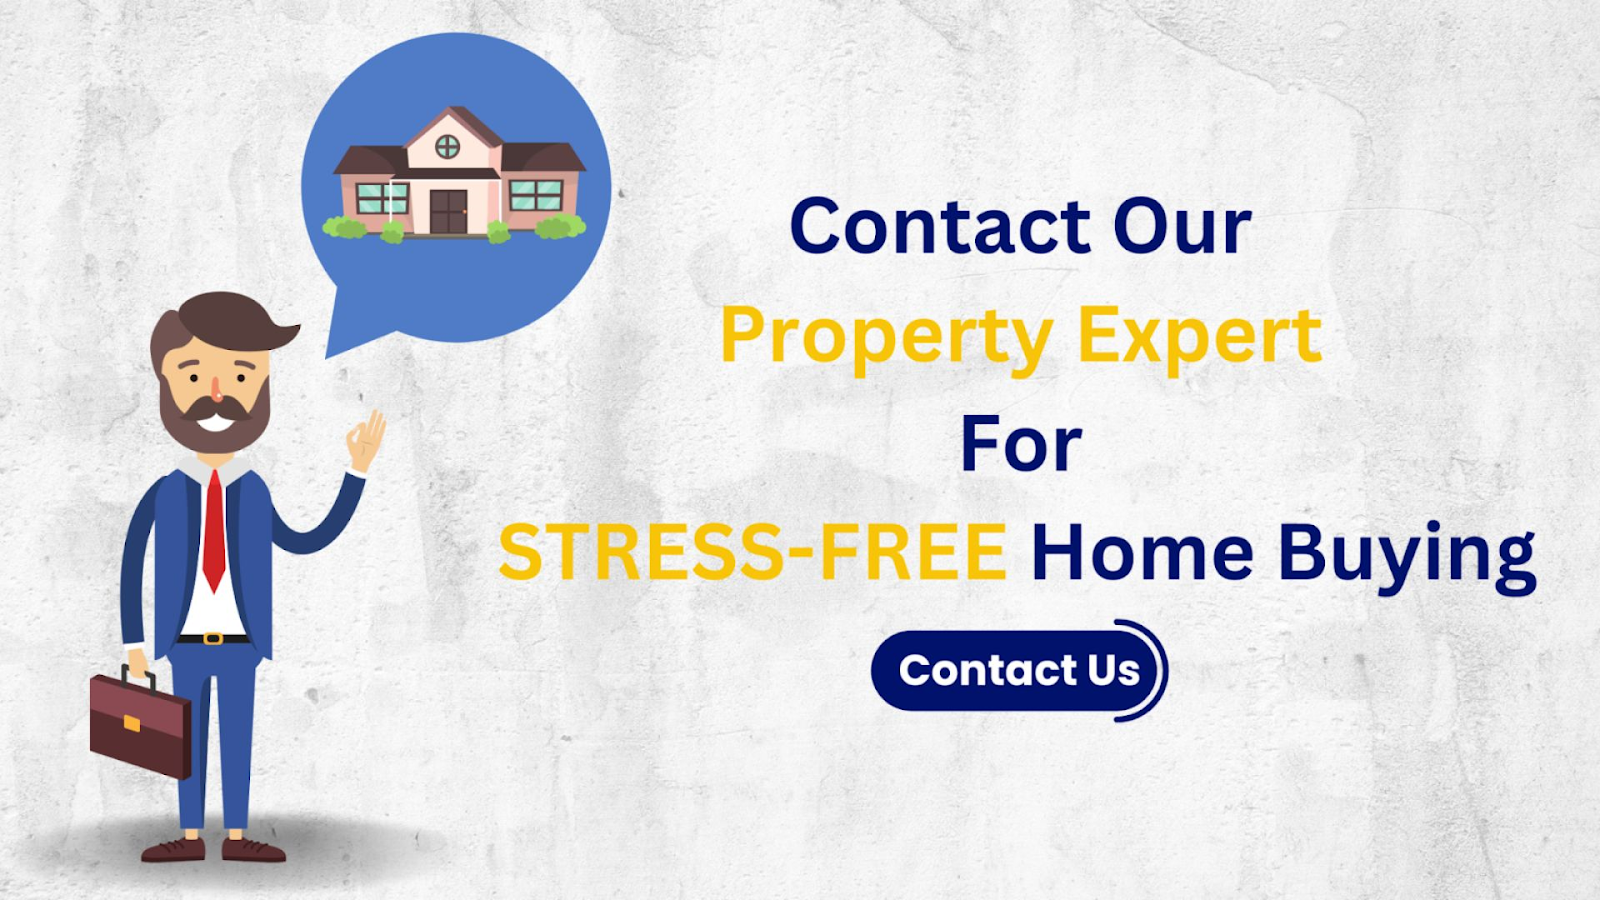 For a stress-free house purchase, get in touch with a PropertyCloud real estate expert.